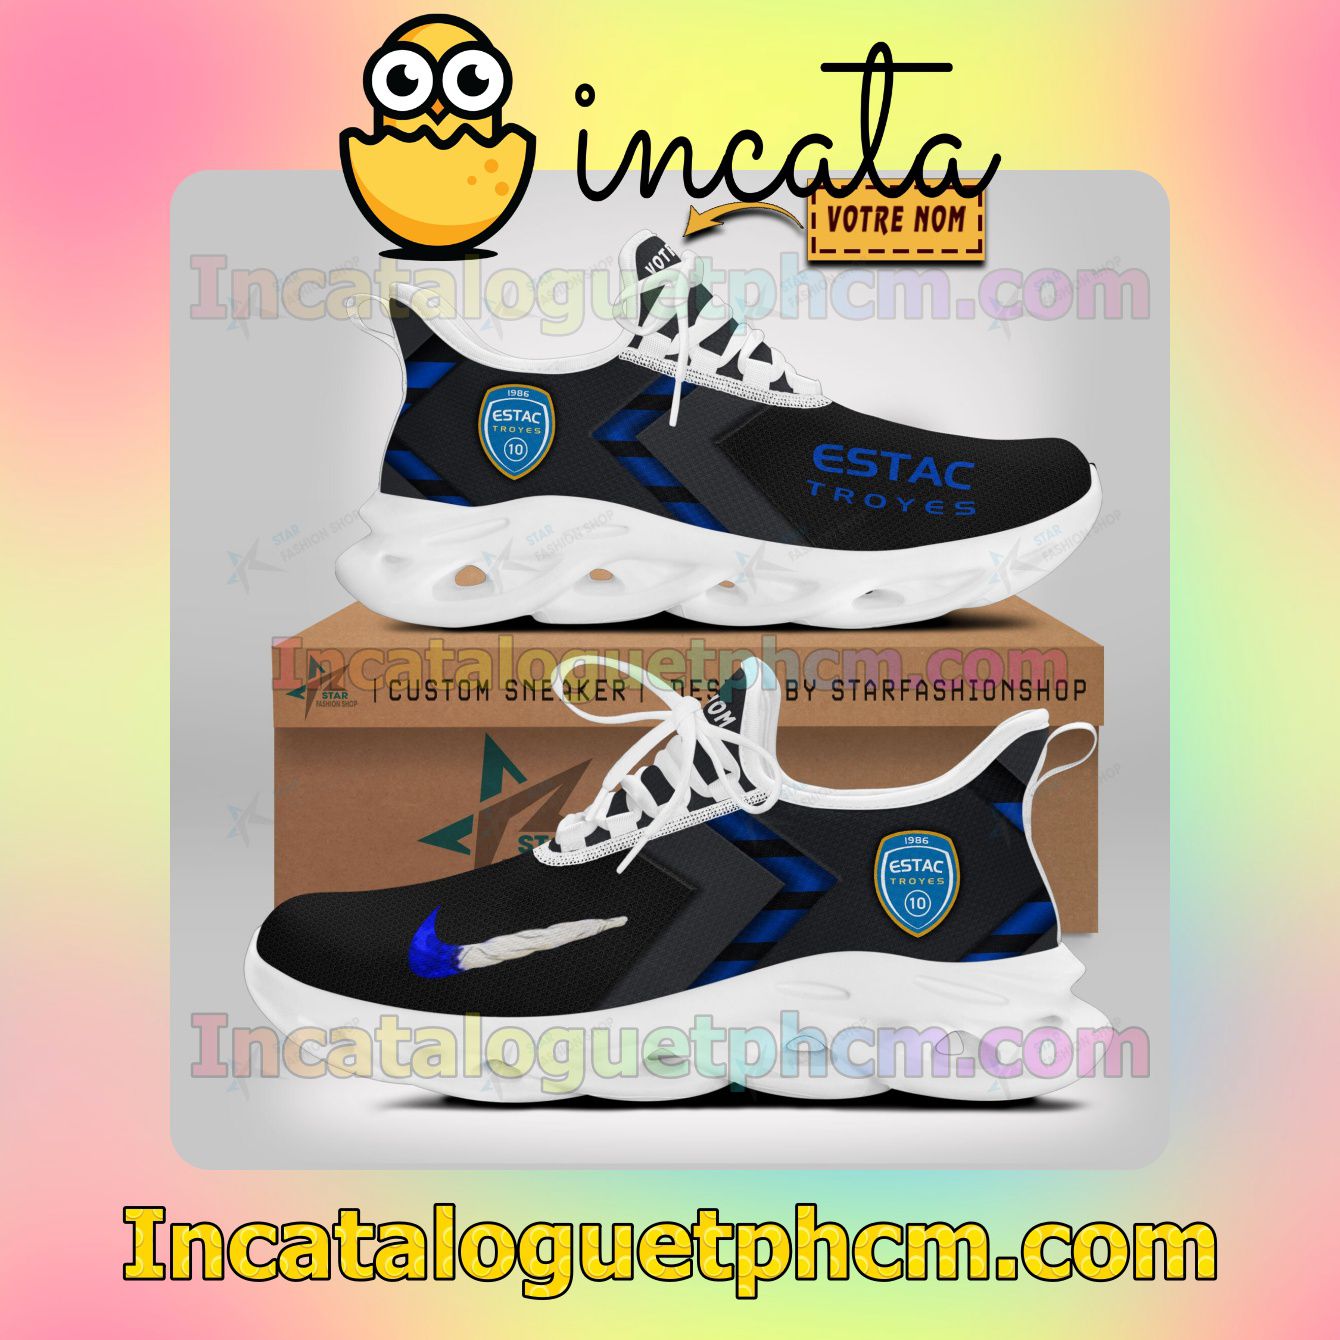 Best Gift ESTAC Troyes Low Top Shoes